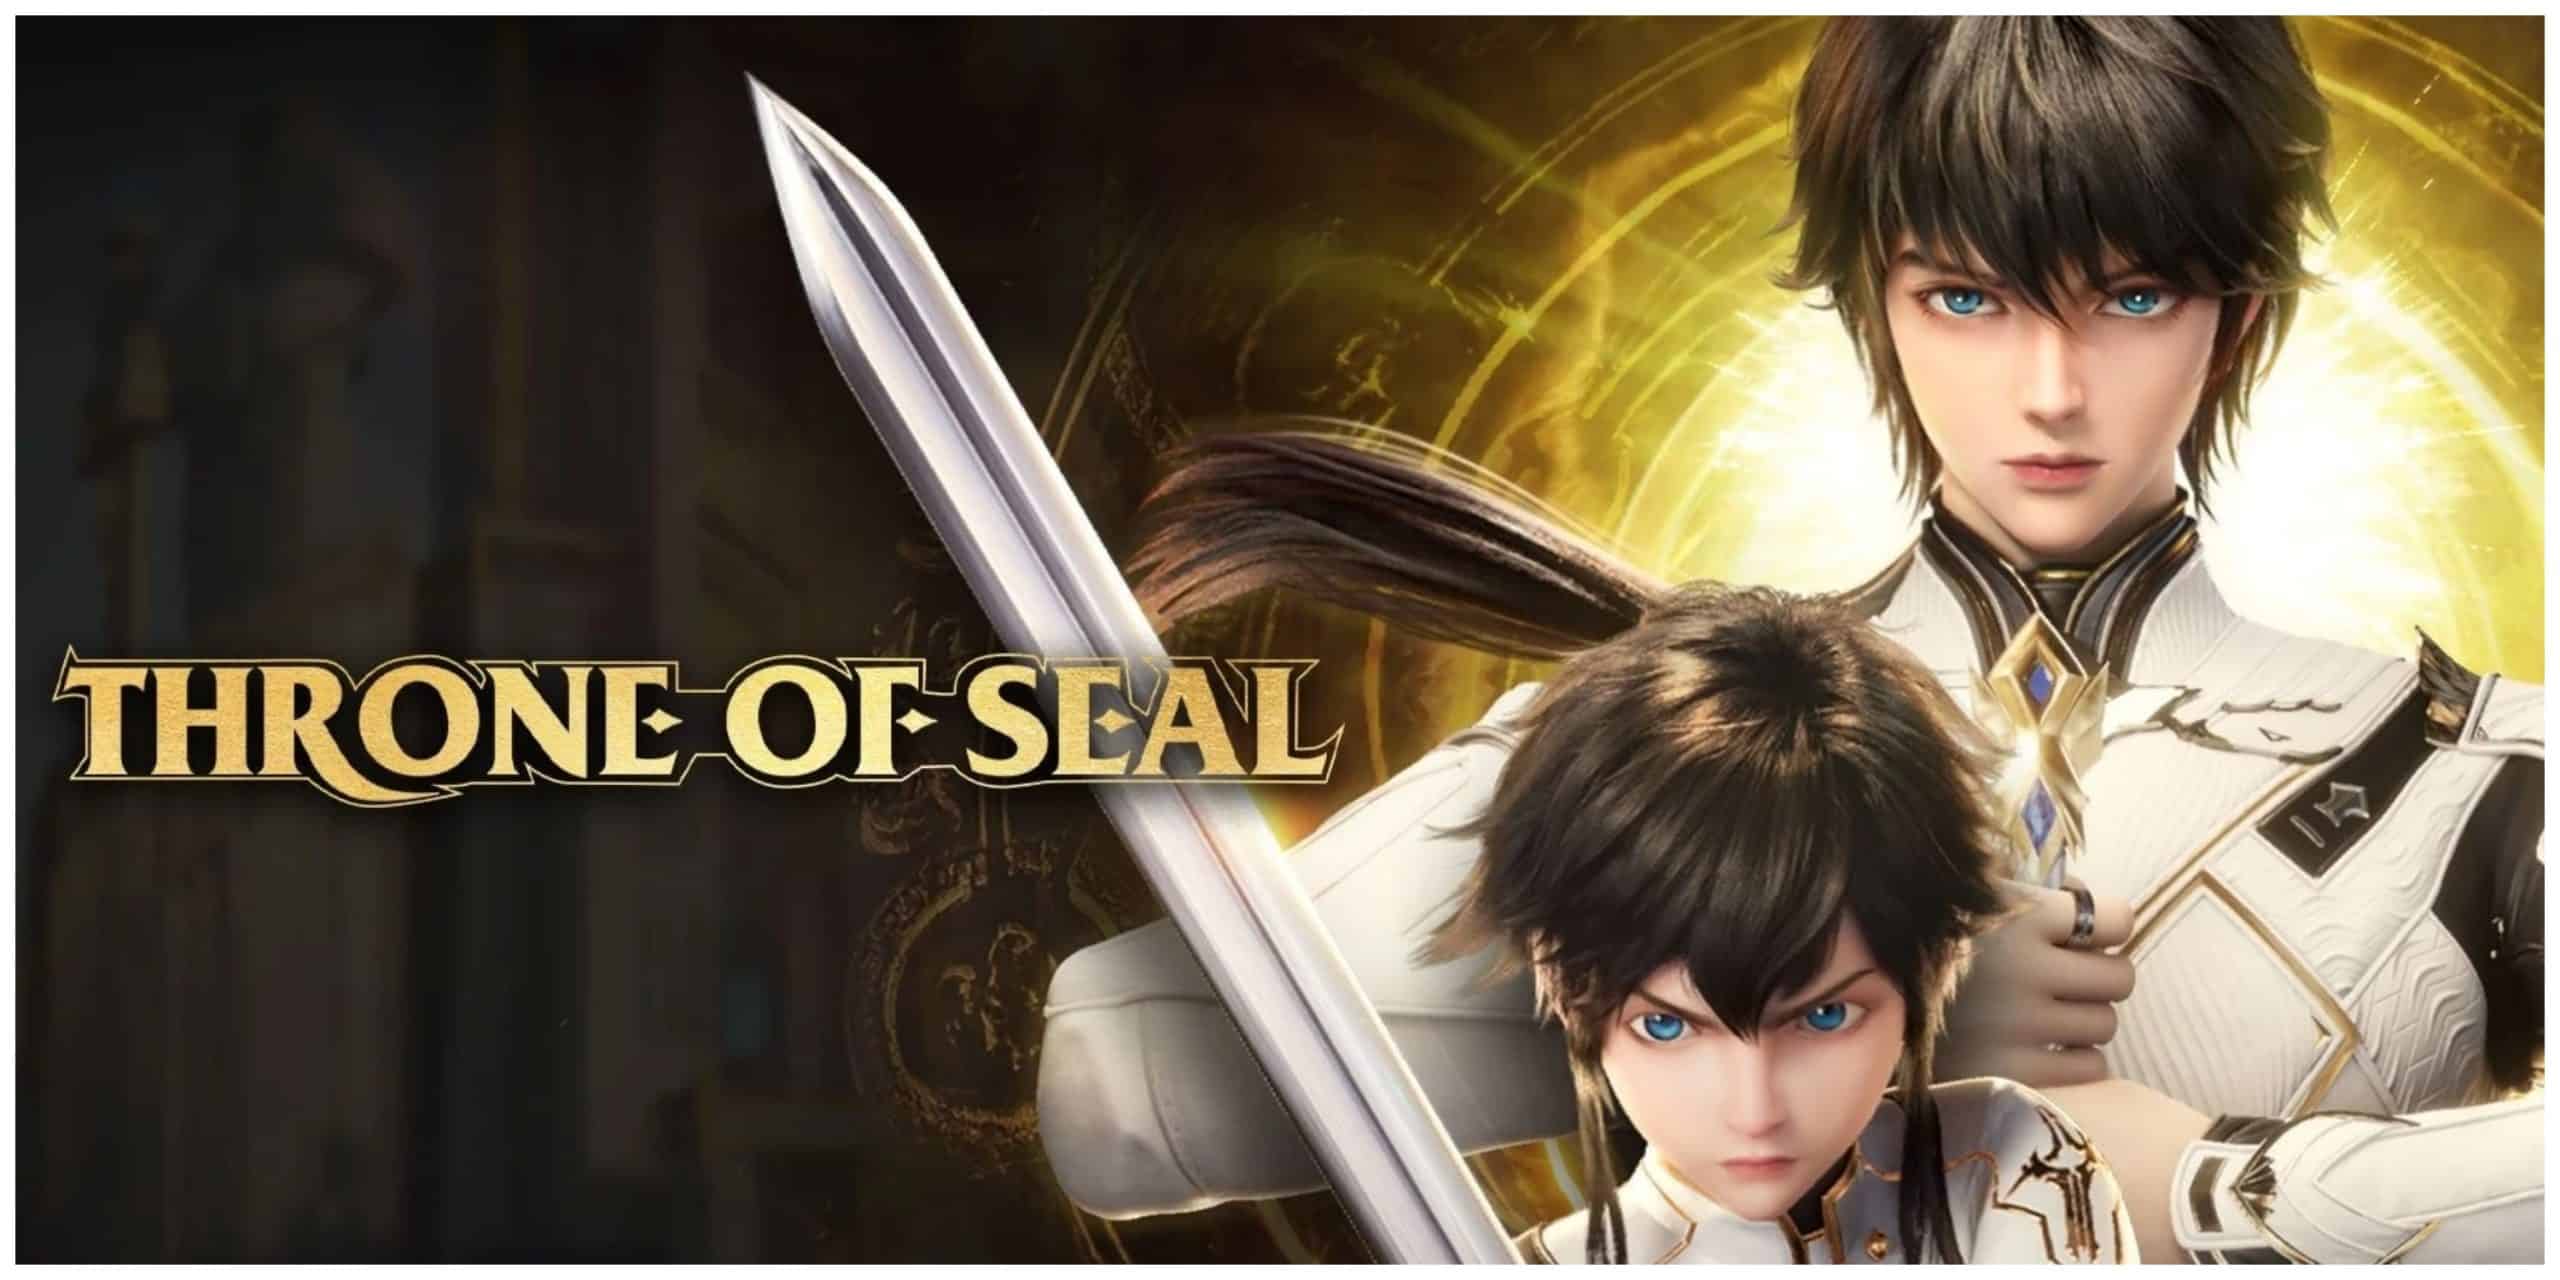 Throne of Seal Chinese Action Fantasy Anime Episode 52 Synopsis